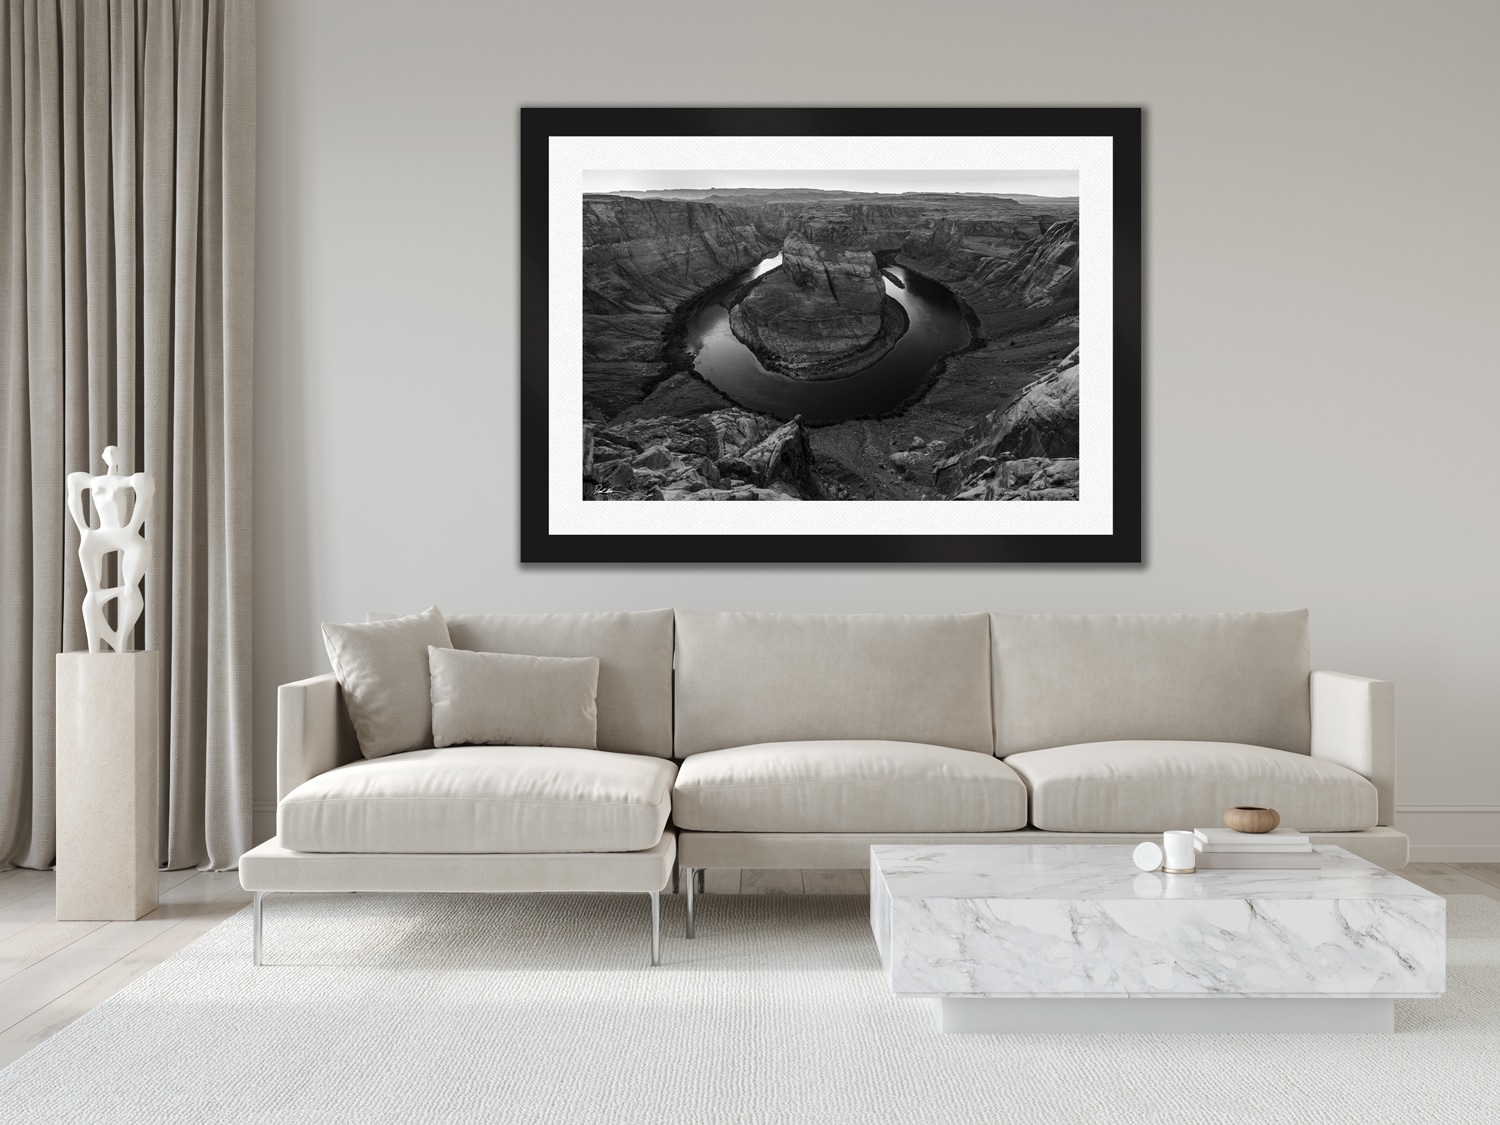 Large framed image by Derek Nielsen in black and white displayed above a couch in modern luxury home